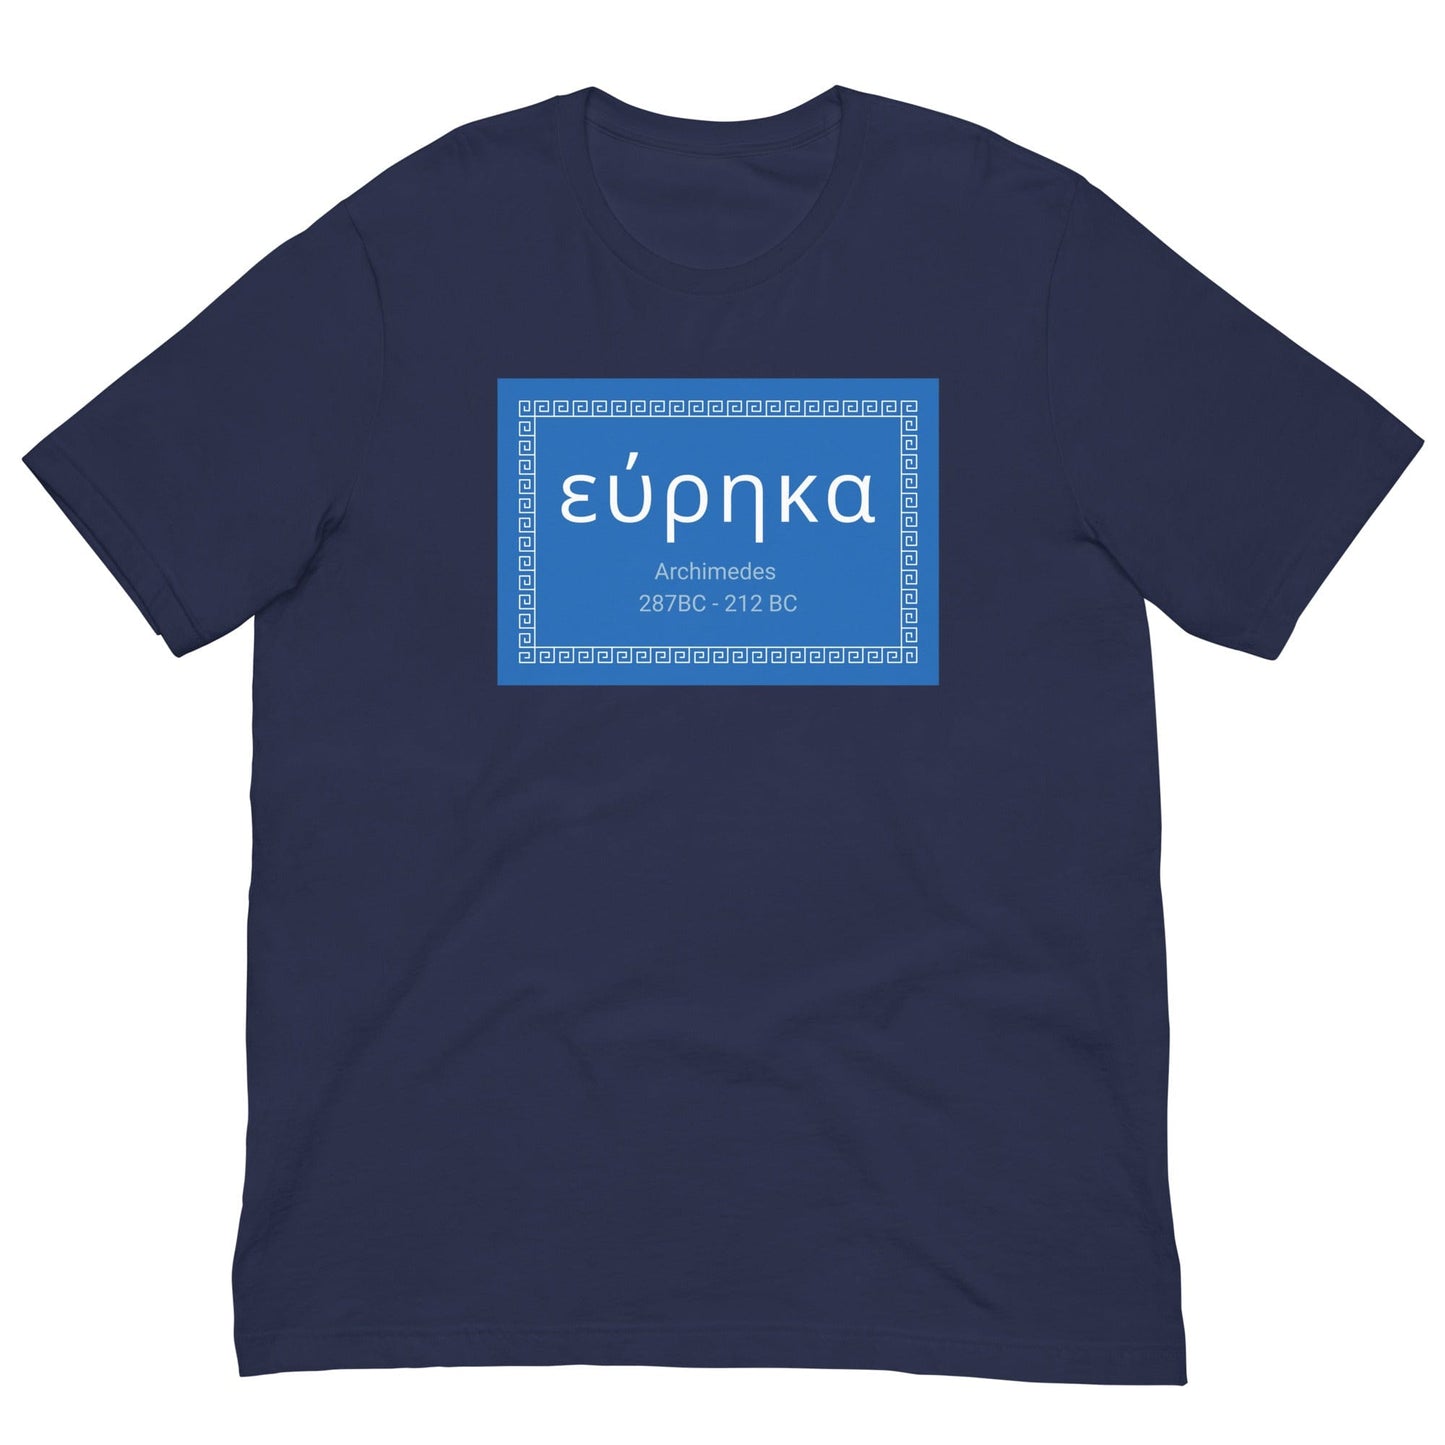 Eureka - Archimedes quote T-shirt Navy / XS